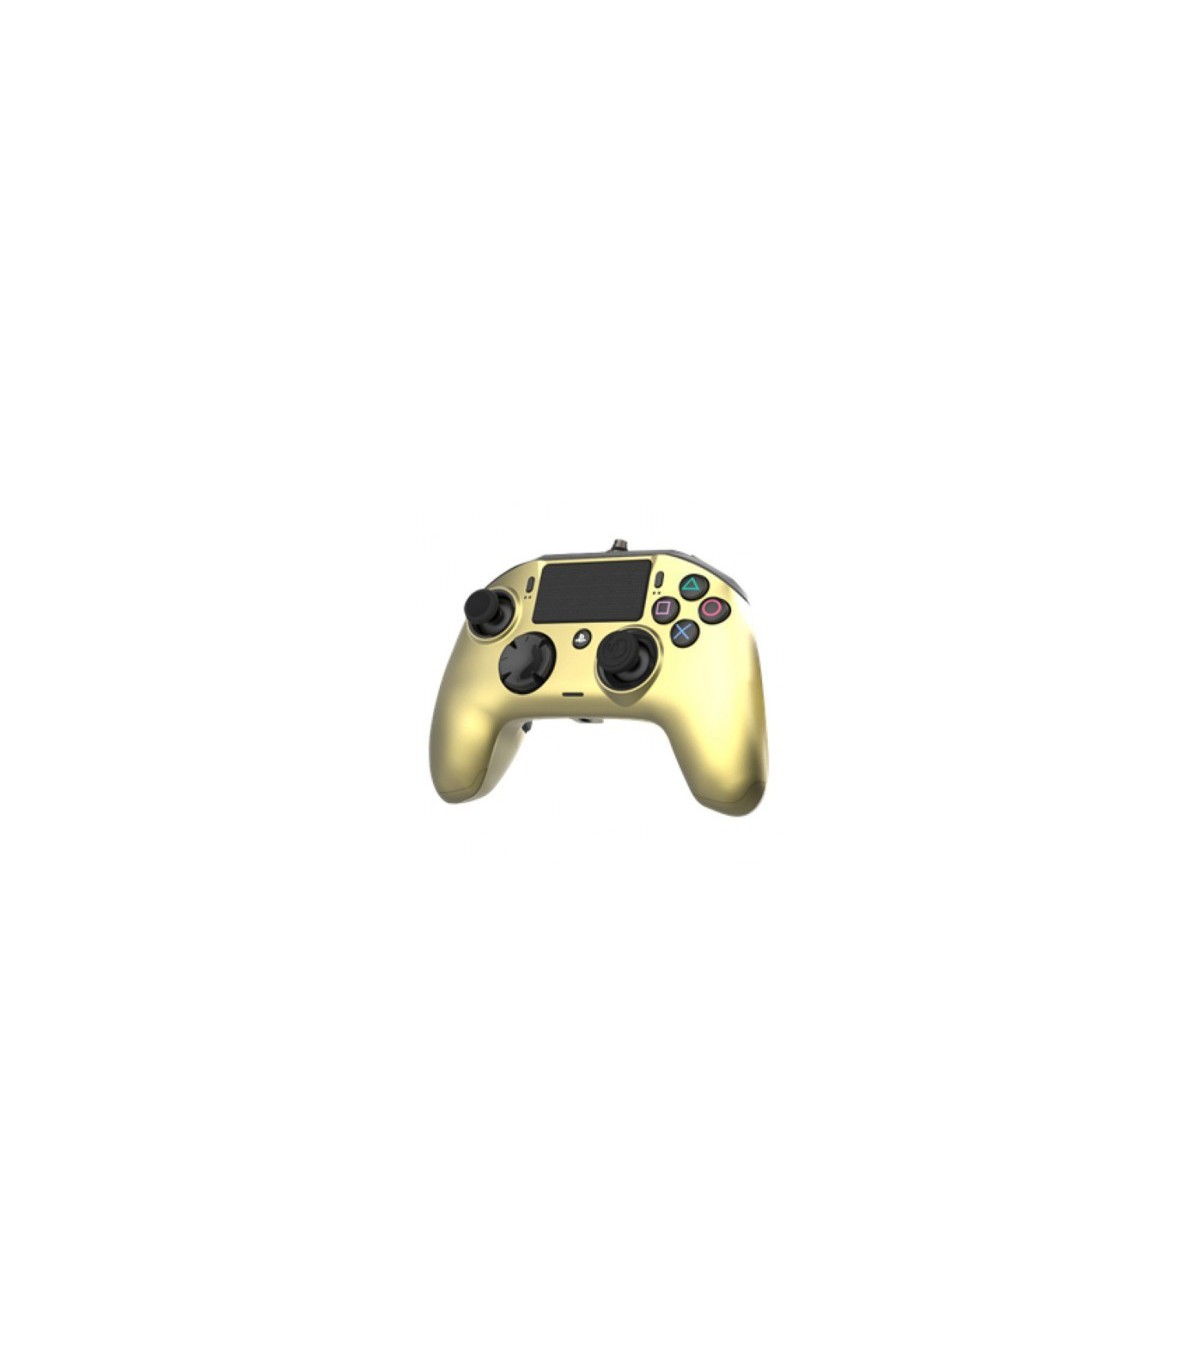  PS4 Revolution Pro Controller gold